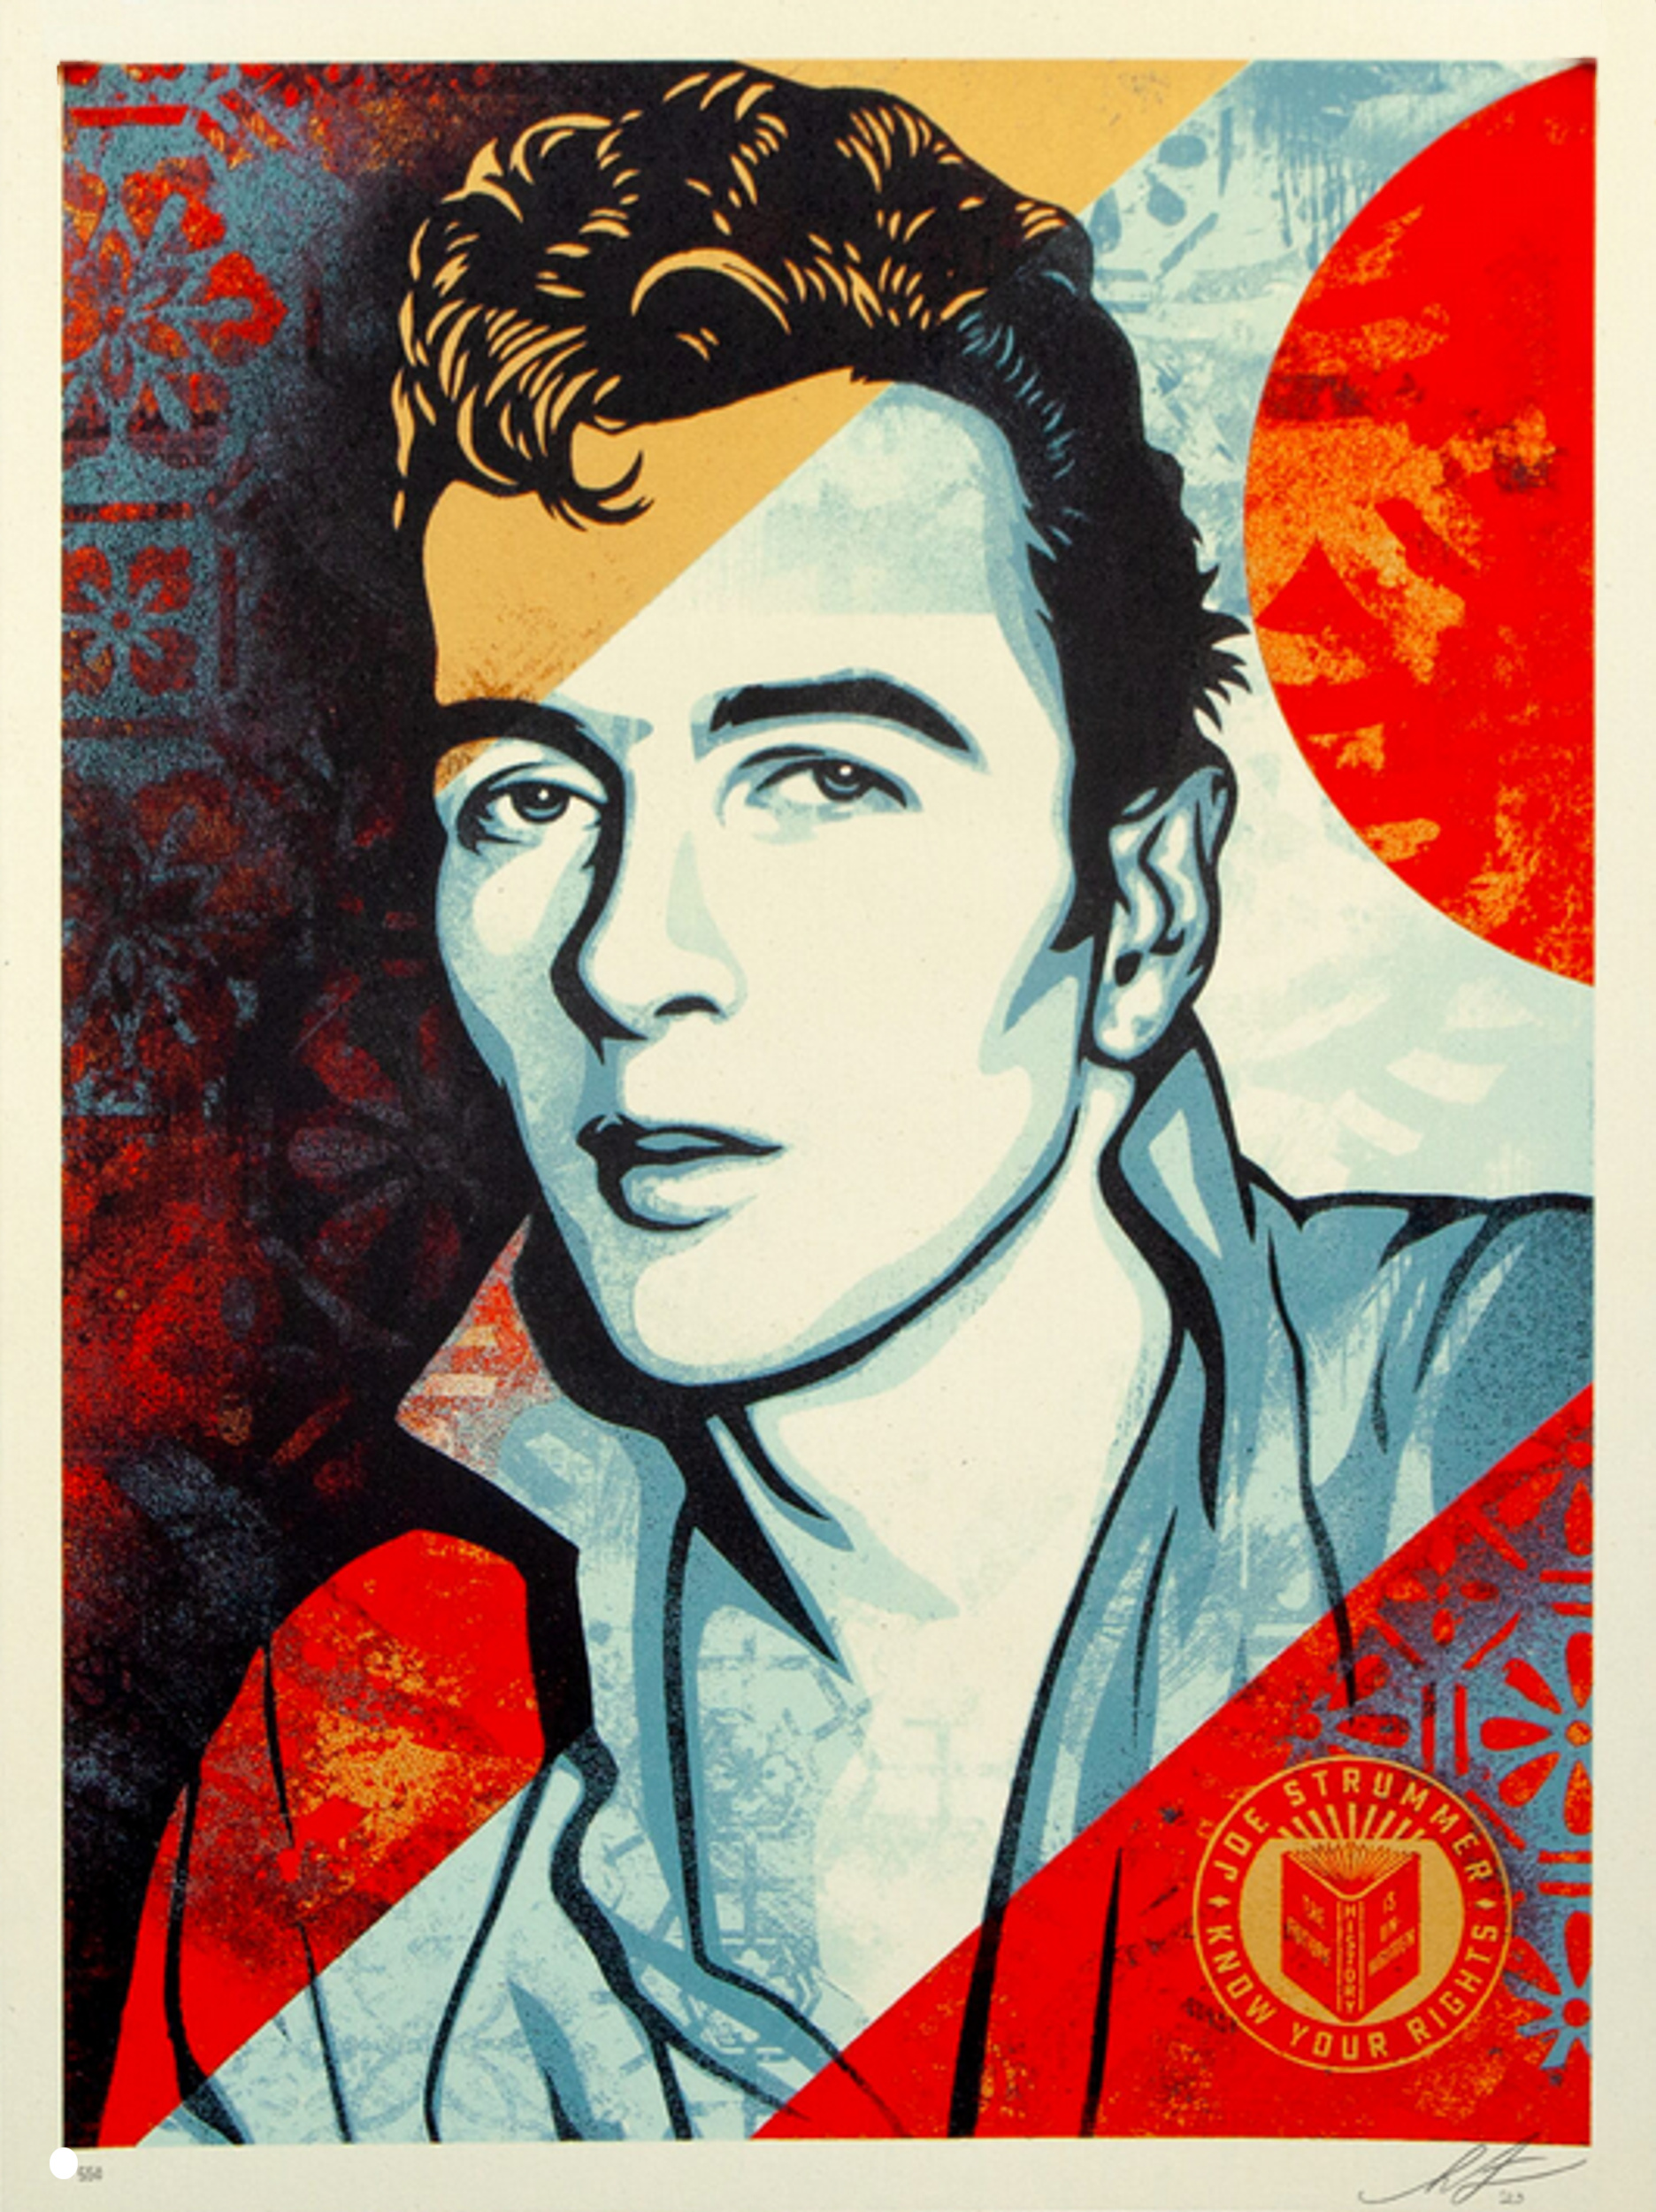 Joe Strummer – Know Your Rights - Shepard Fairey